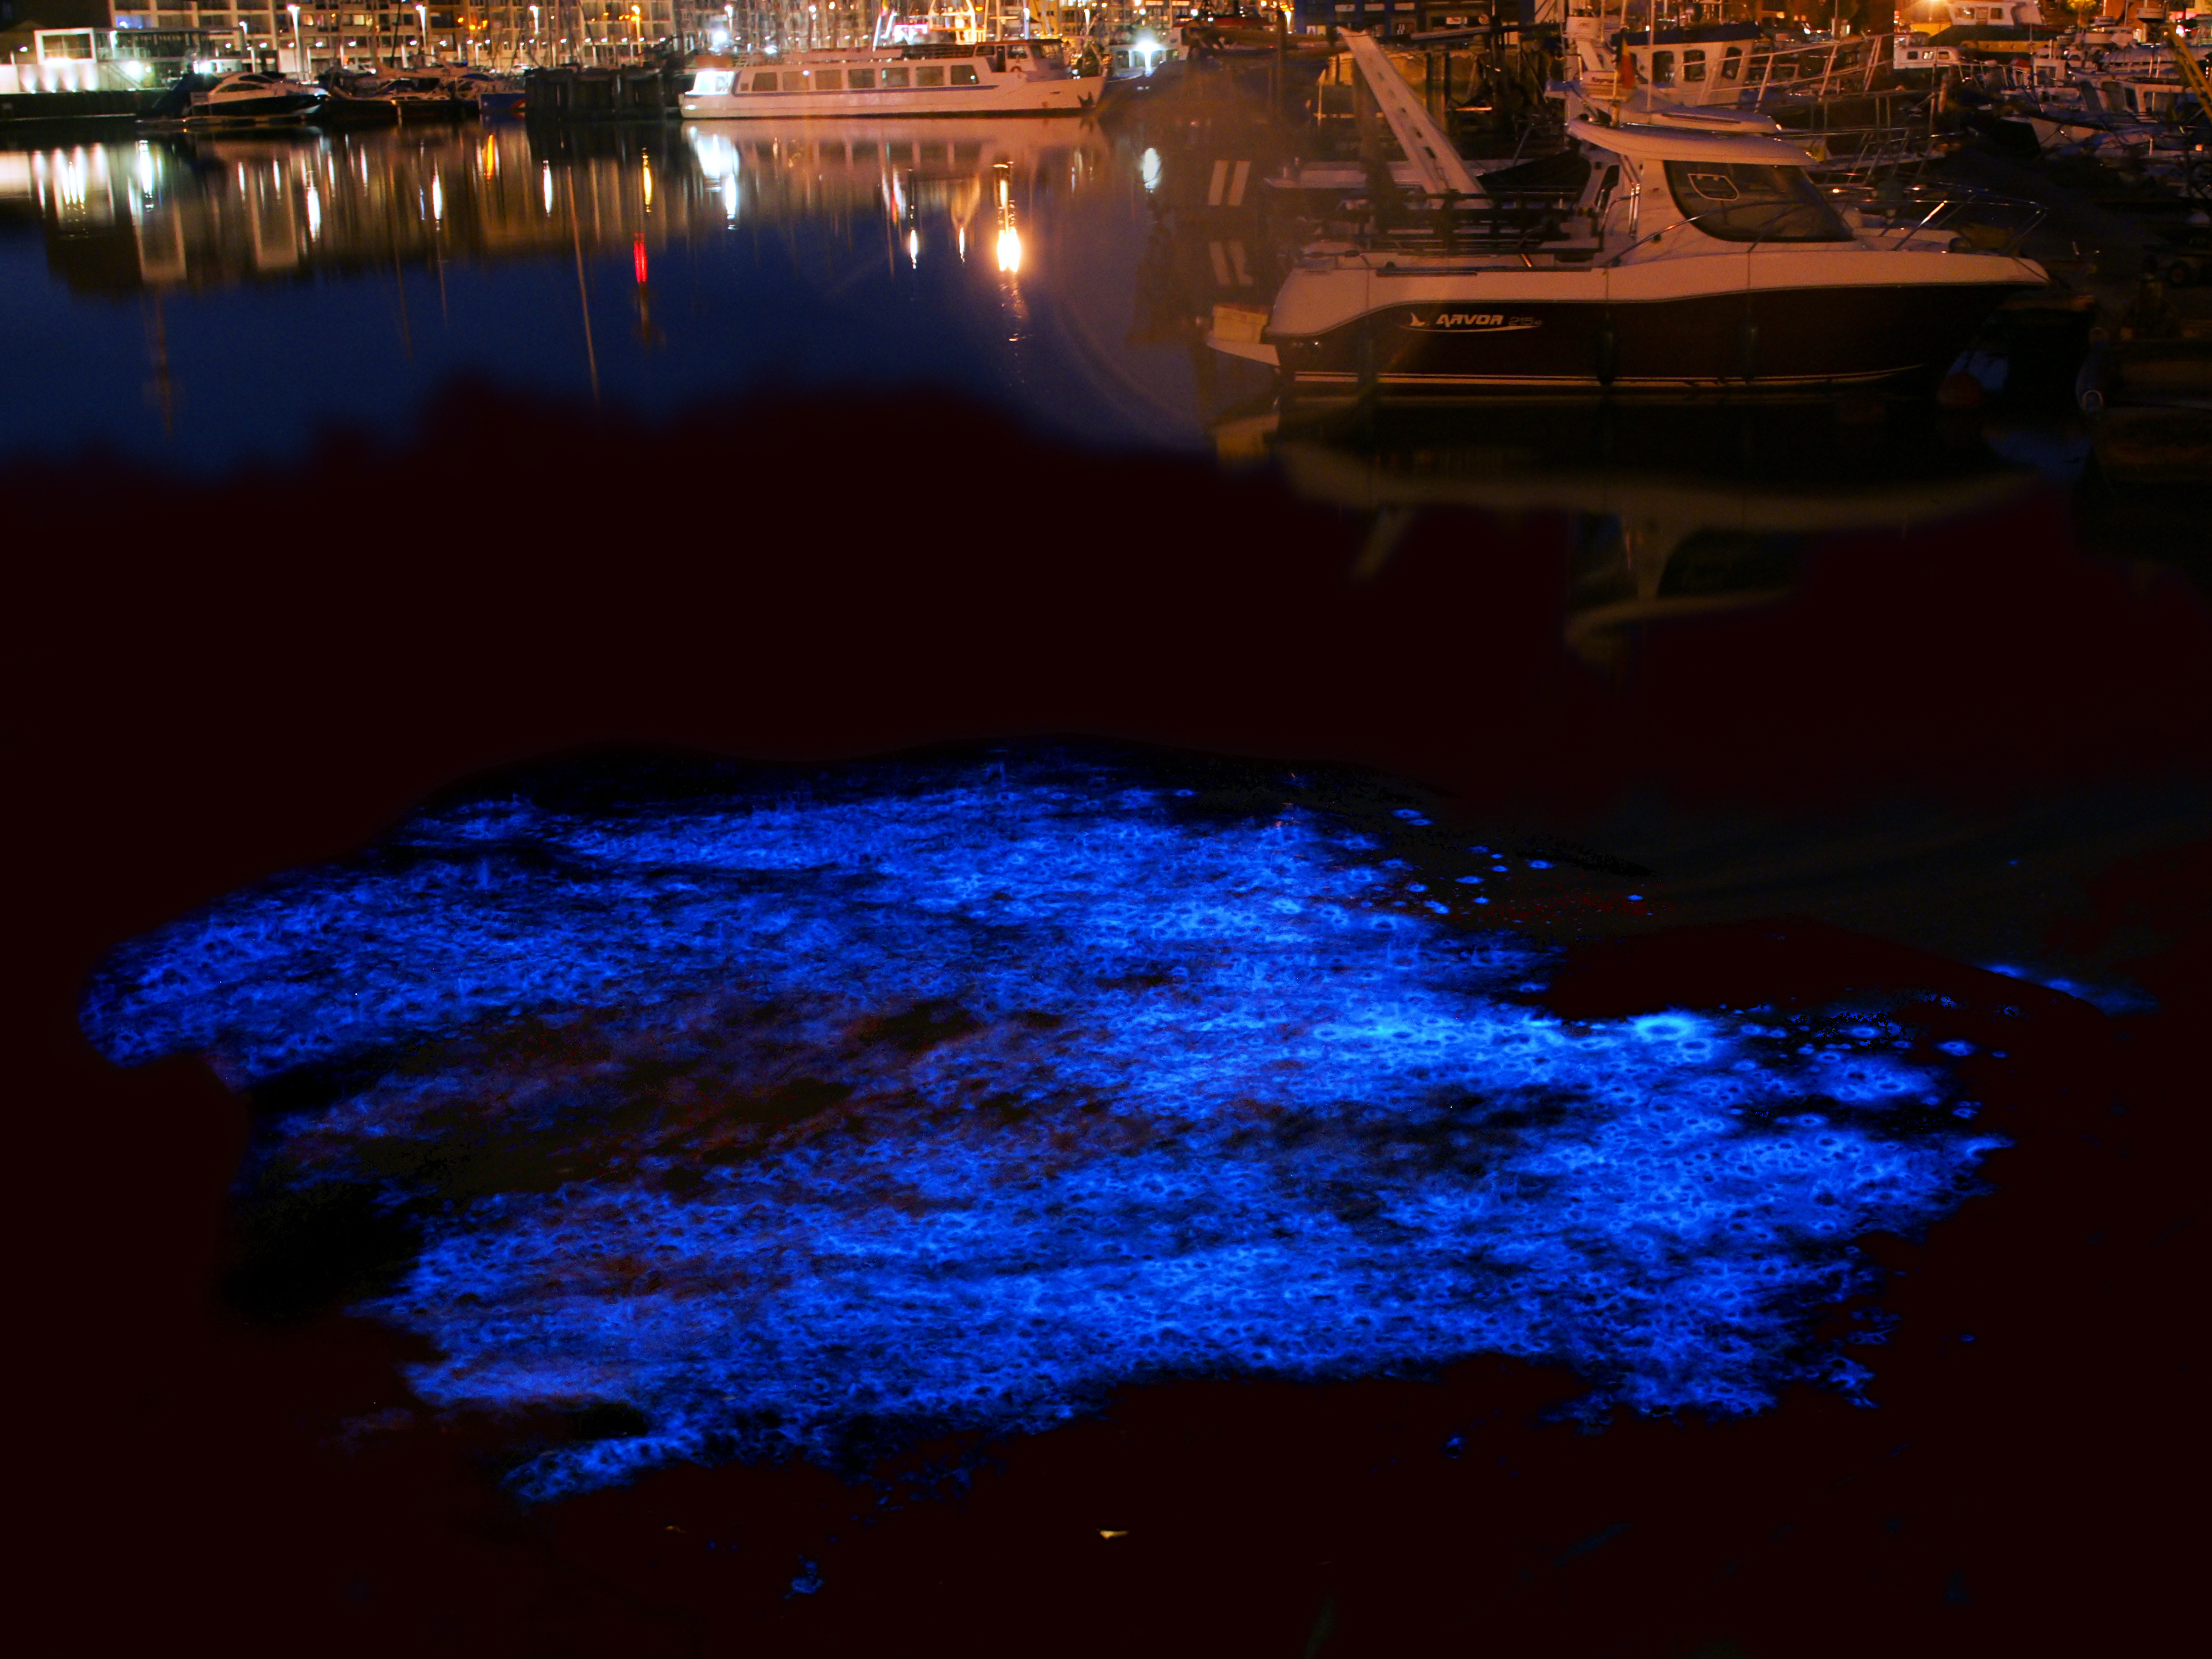 Bioluminescence in ocean. Image used with Permission, 2013. Image located at http://en.wikipedia.org/wiki/File:Noctiluca_scintillans.jpg